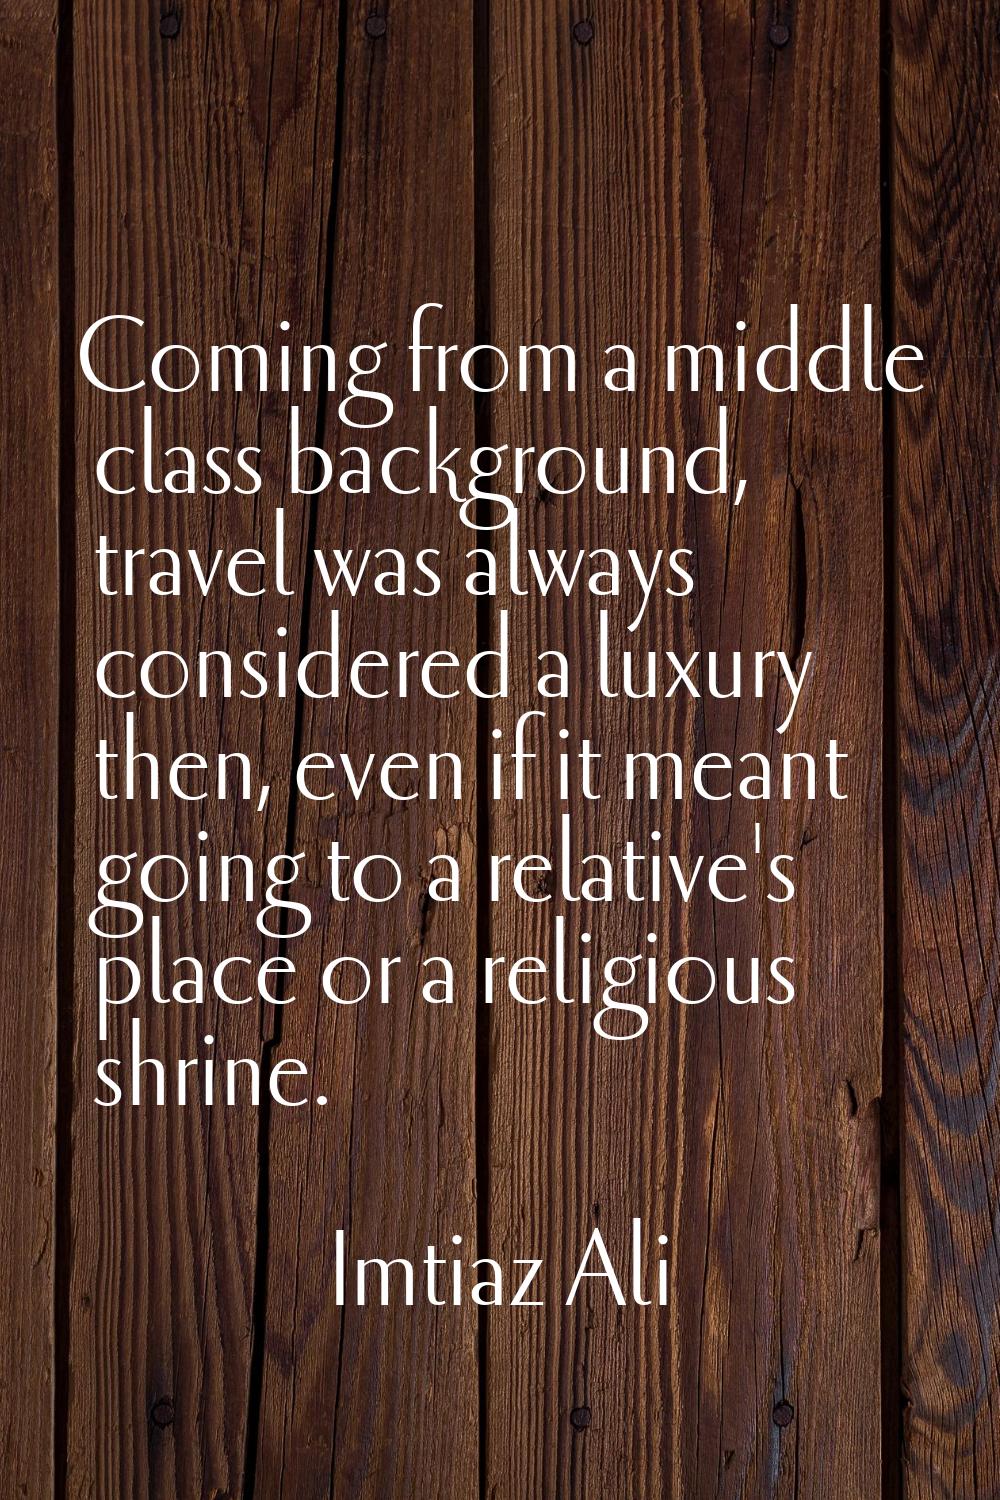 Coming from a middle class background, travel was always considered a luxury then, even if it meant